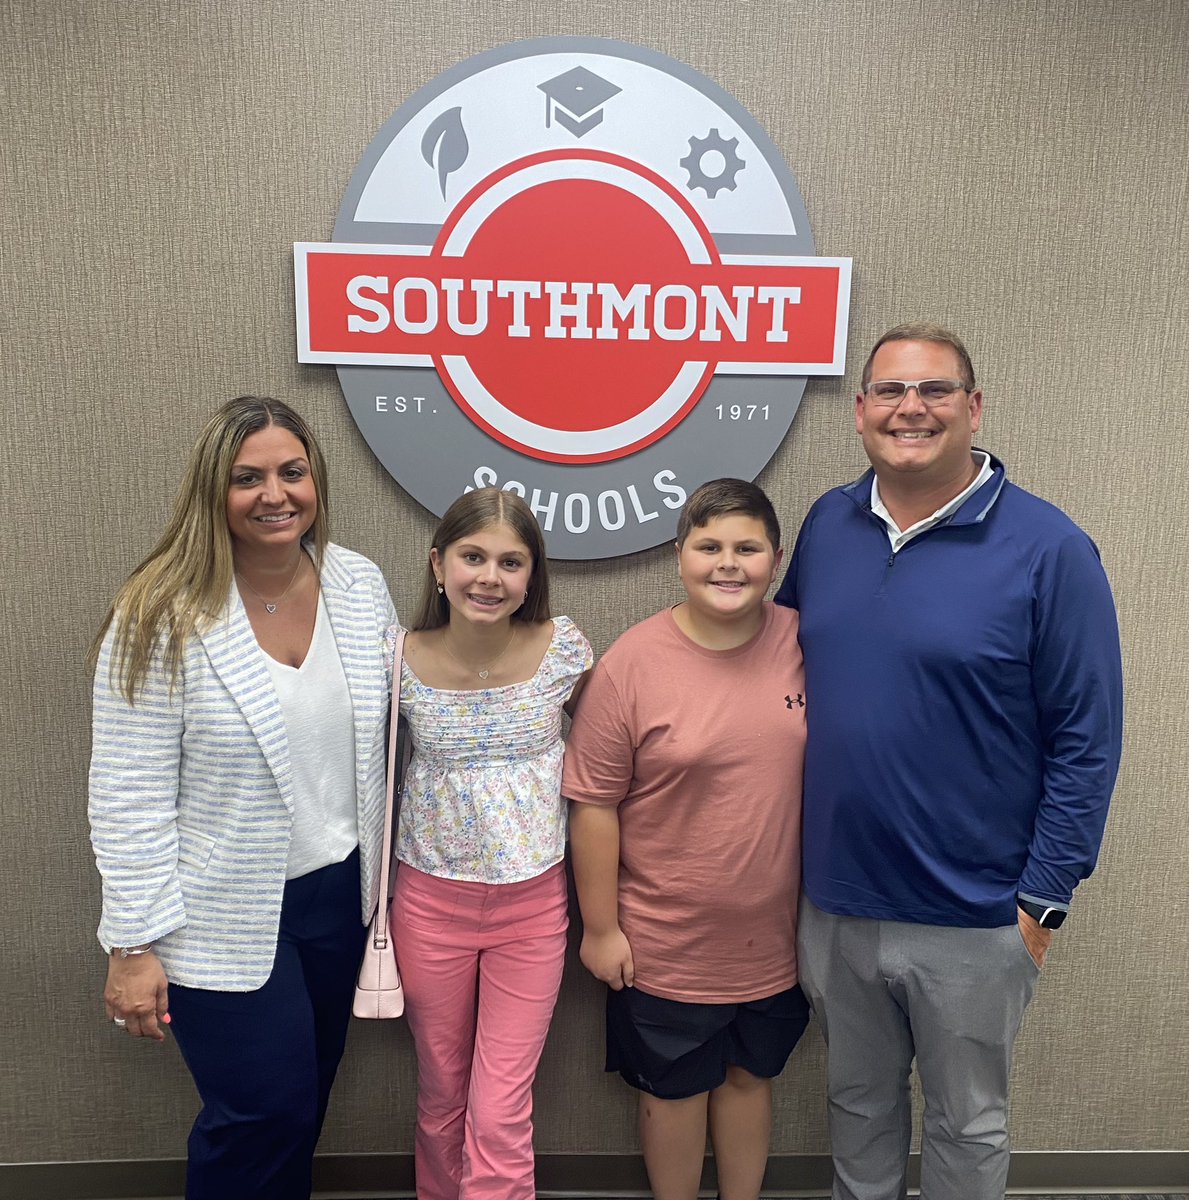 We would like to welcome Dr. Stephanie Hofer to our Southmont Family! The Board of Trustees approved Dr. Hofer last night as our Superintendent. #ProudToBeAMountie